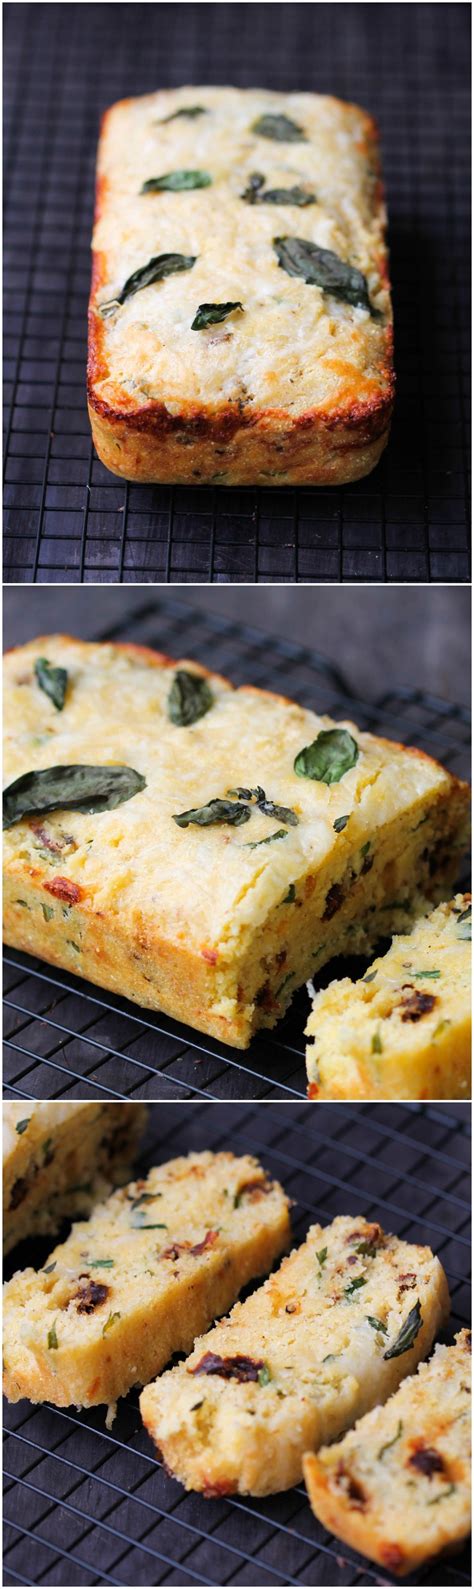 This versatile product comes in several grits can be the star of the meal or side dish. Corn Bread with Sun-Dried Tomatoes, Basil, and Cheese ...